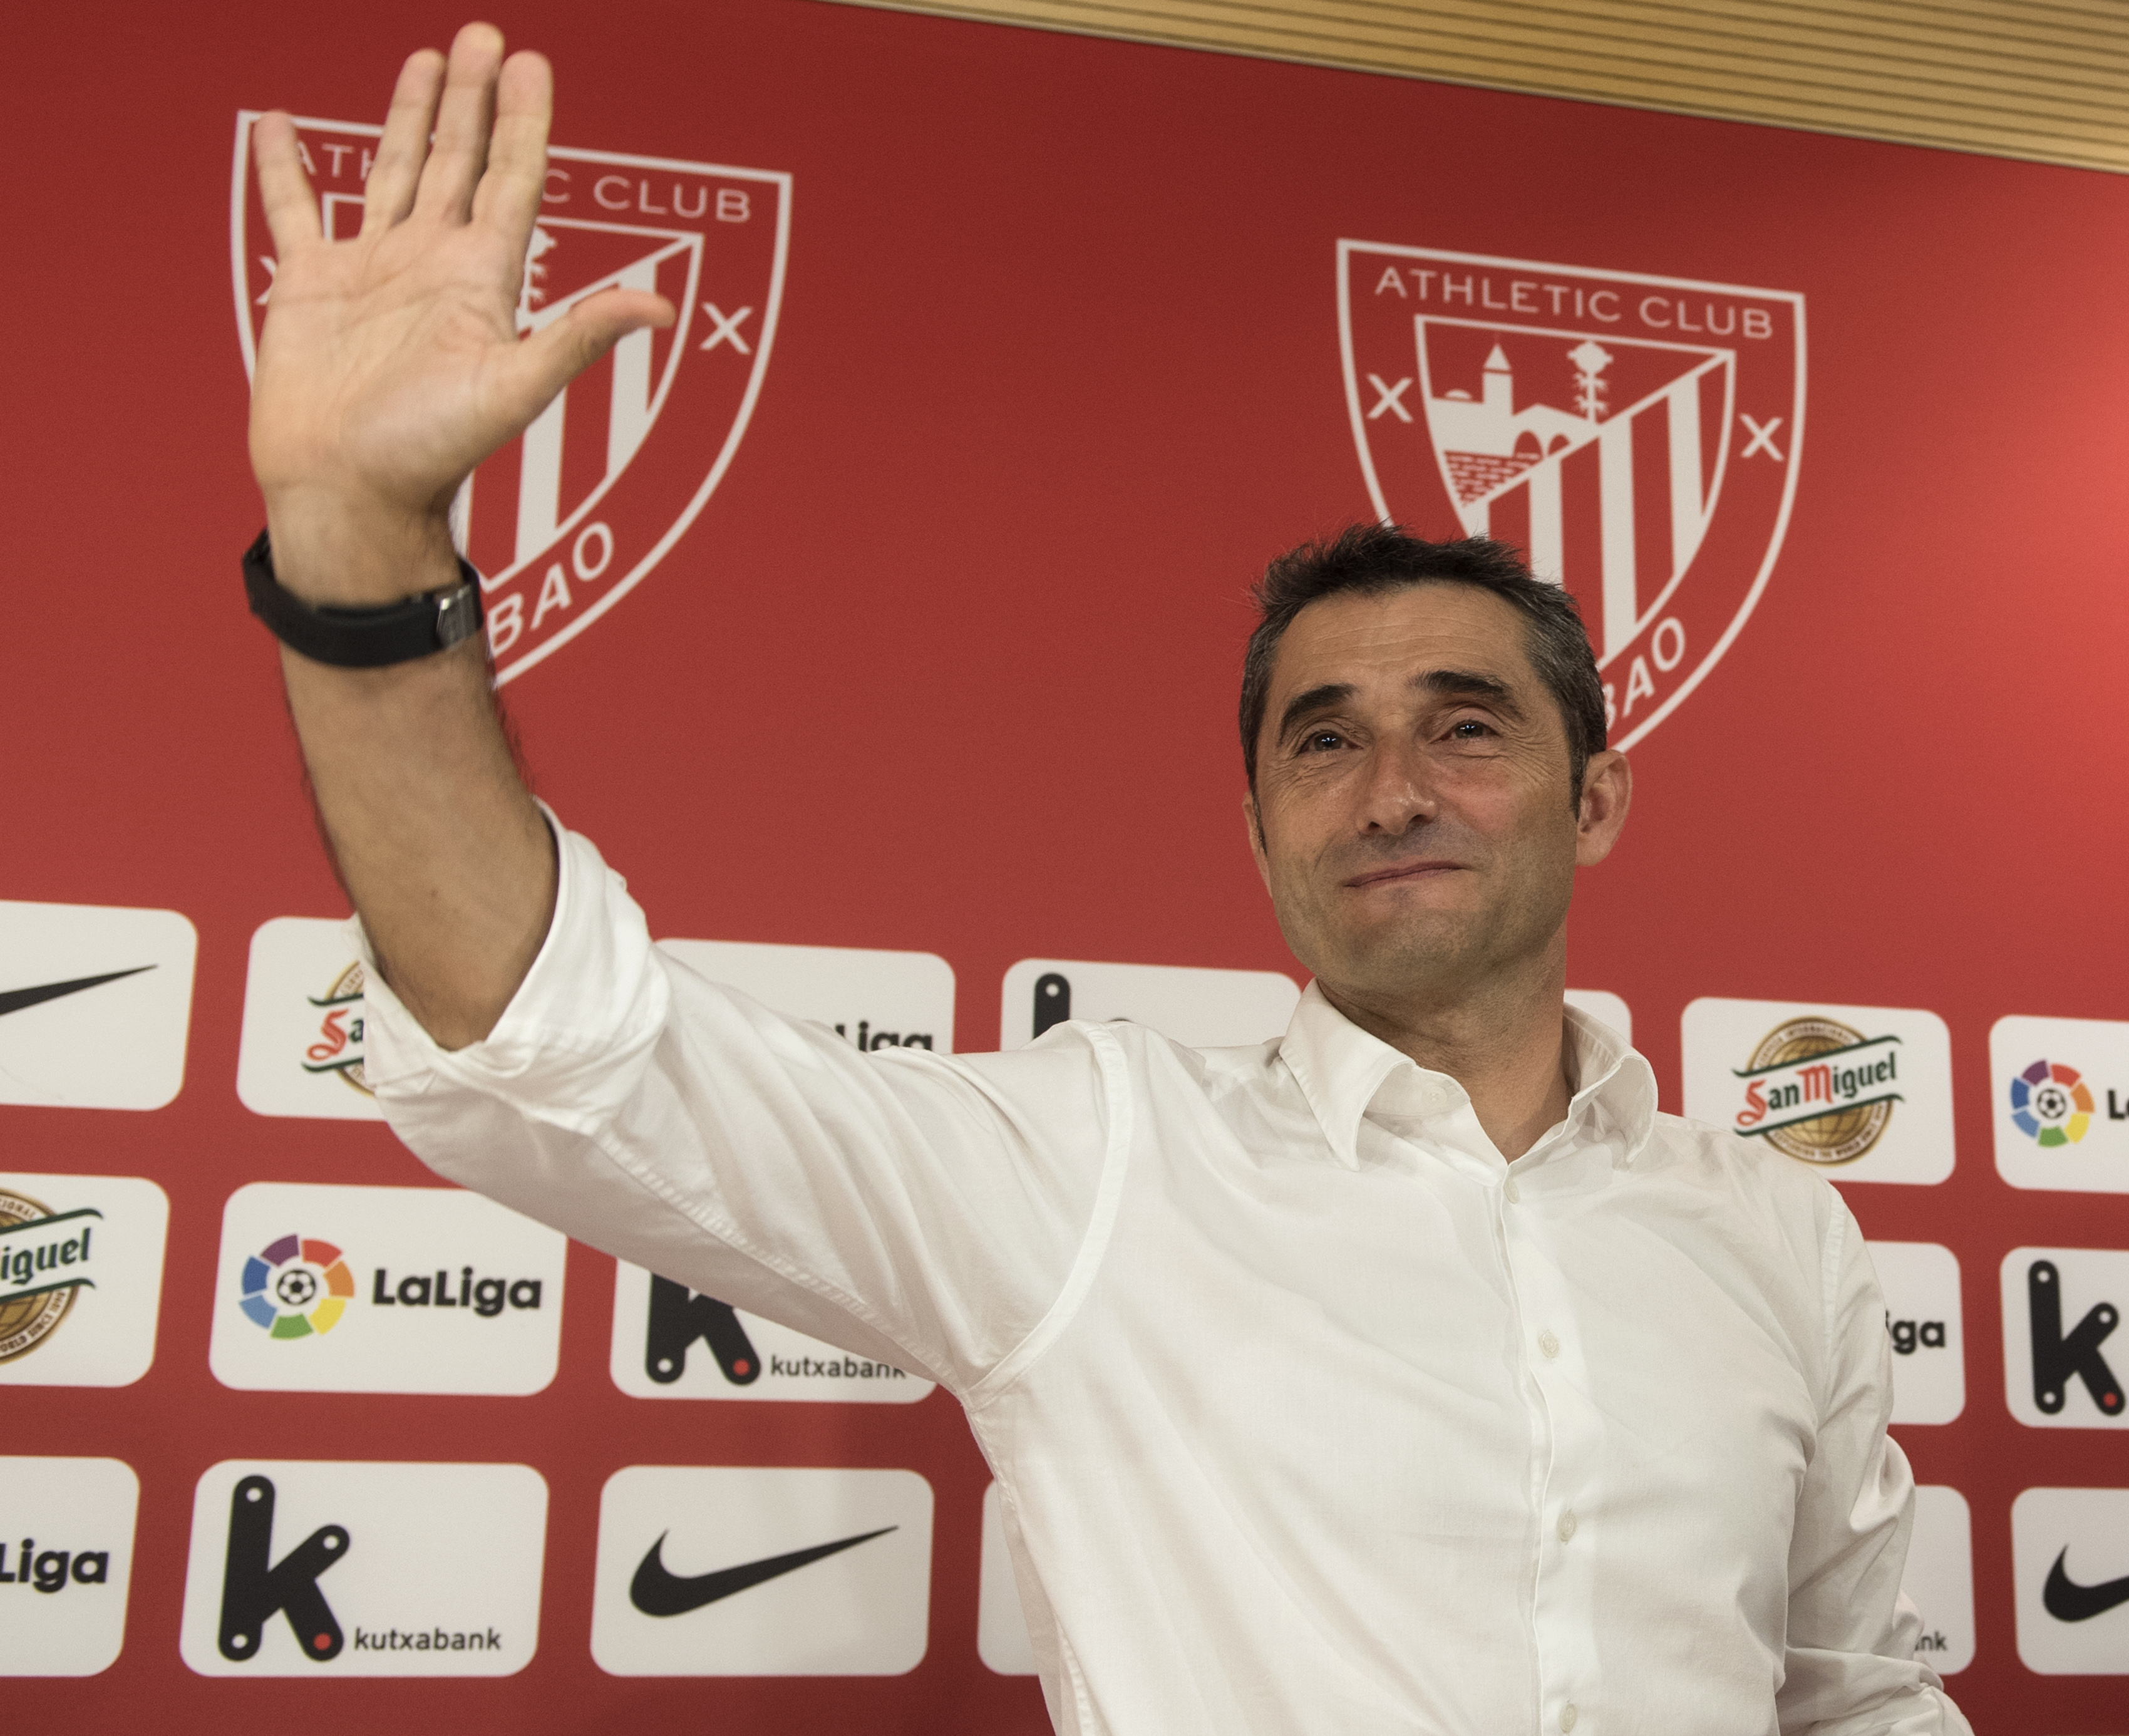 Athletic Bilbao's Spanish coach Ernesto Valverde waves journalist at the end of a press conference held to announce that he was quitting the football club in Bilbao on May 24, 2017.
Valverde, 53, has been Athletic coach for four seasons, bagging one trophy during his mandate -- the Supercup after victory over Barca in 2015. Spanish media reports that Valverde should be soon named as successor to outgoing Barcelona coach Luis Enrique. / AFP PHOTO / ANDER GILLENEA        (Photo credit should read ANDER GILLENEA/AFP/Getty Images)